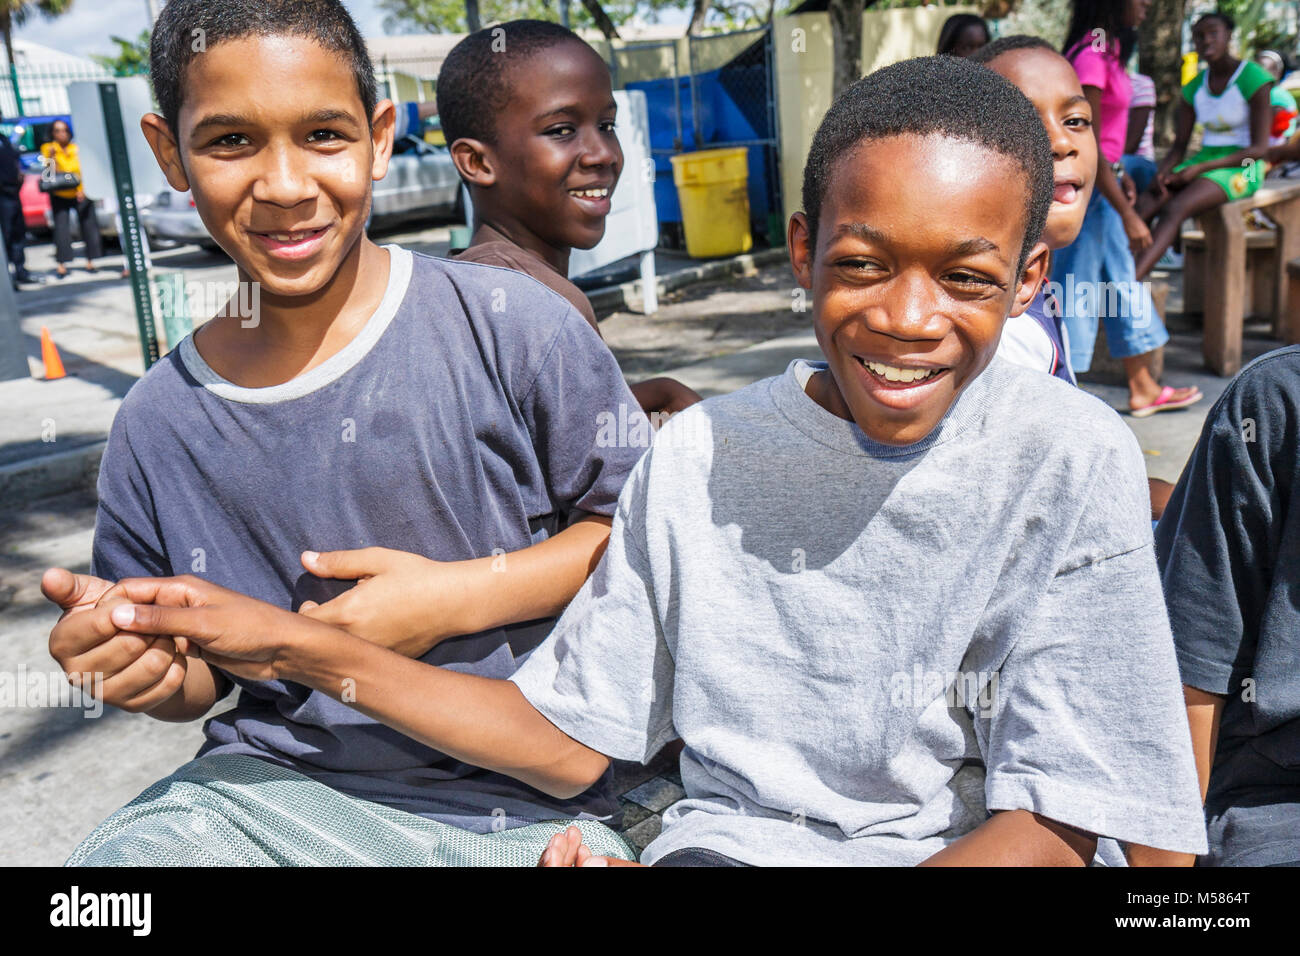 Miami Florida,Liberty City,African Square Park,inner city,low income,poverty,economic,Black Blacks African Africans ethnic minority,boy boys,male kid Stock Photo